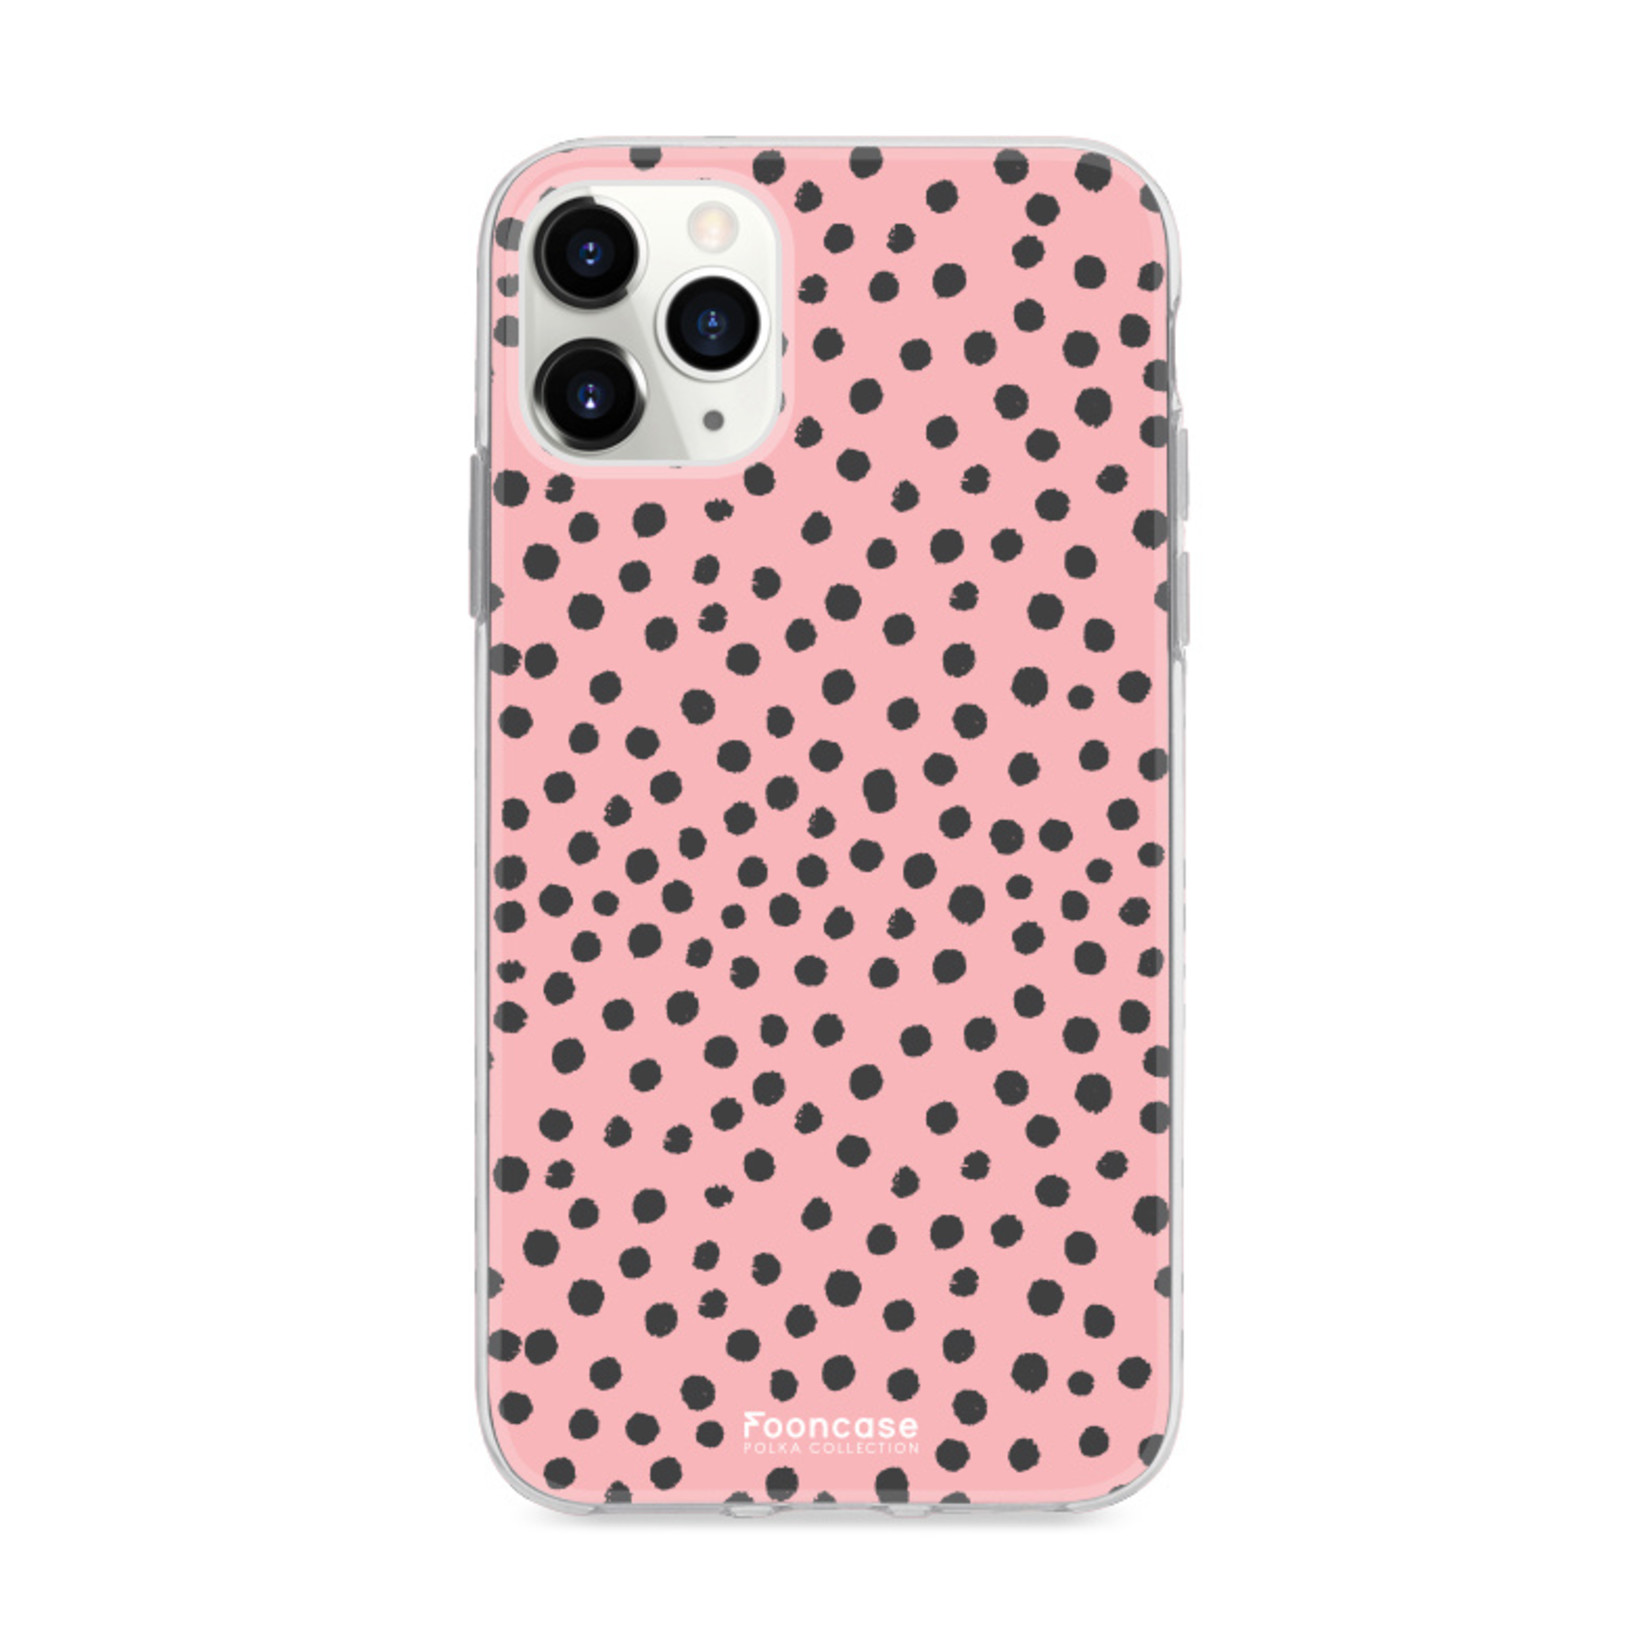 FOONCASE IPhone 11 Pro - POLKA COLLECTION / Pink